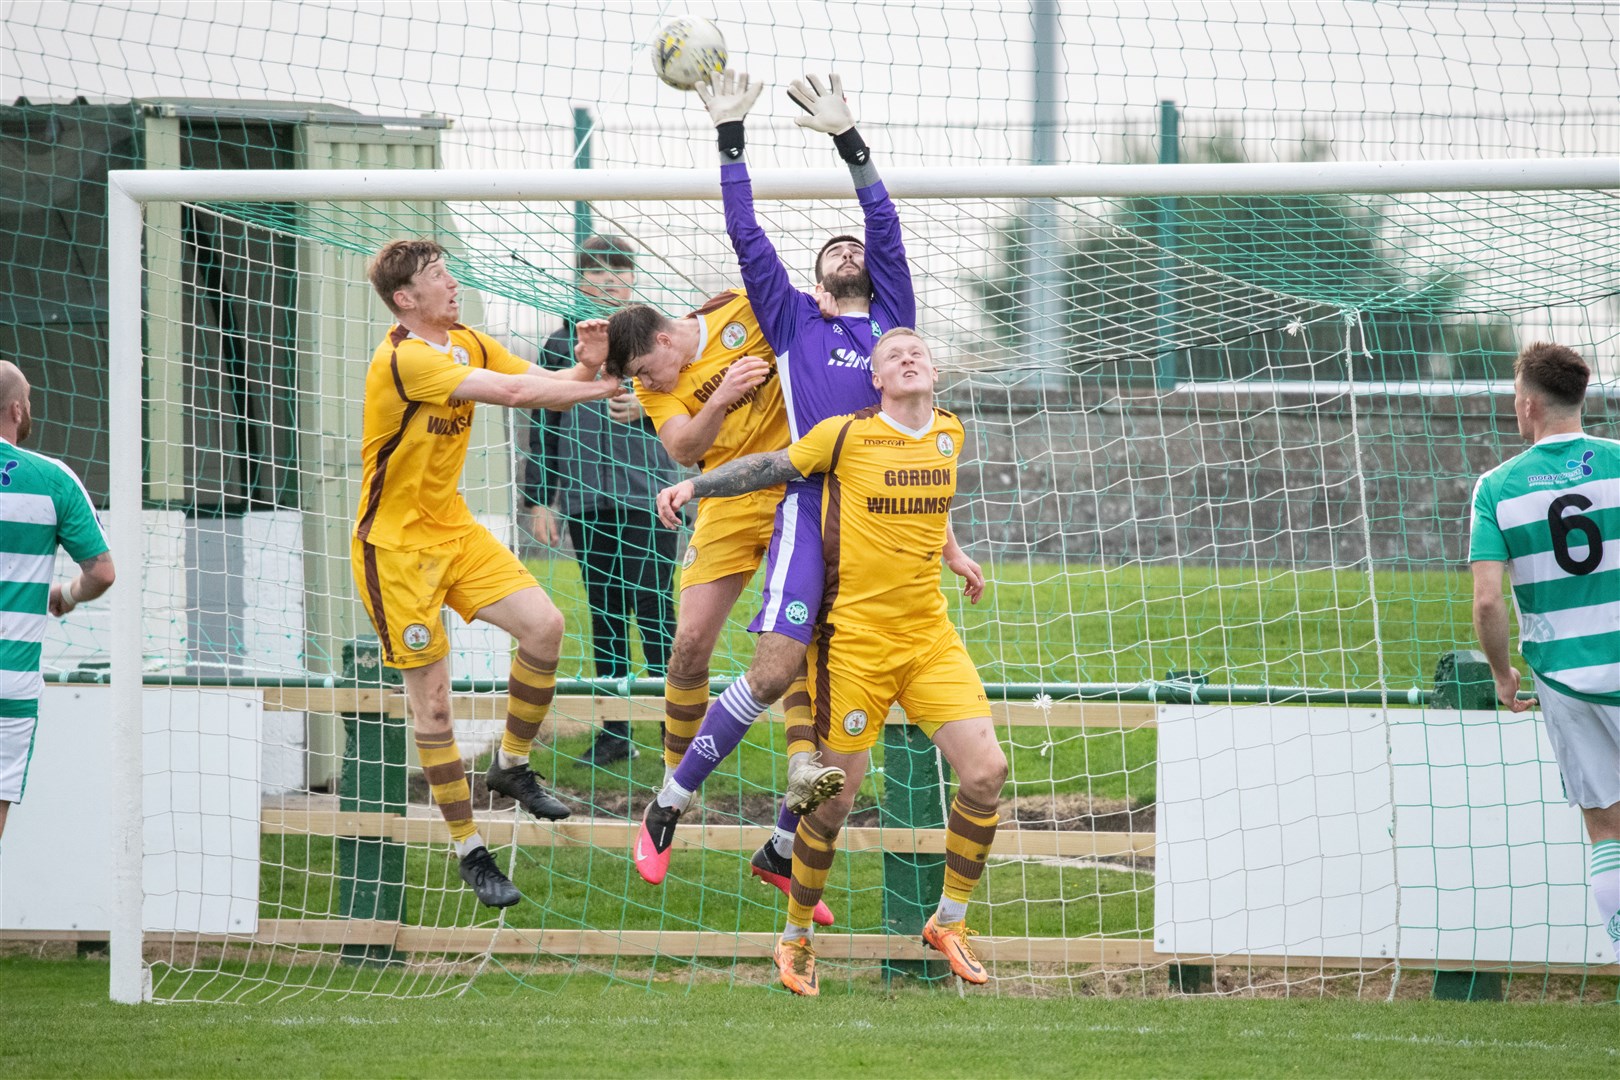 Buckie Thistle's keeper Balint Demus under pressure from a trio of Cans...Buckie Thistle FC (2) vs Forres Mechanics FC (0) - Highland Football League 22/23 - Victoria Park, Buckie 29/10/2022...Picture: Daniel Forsyth..